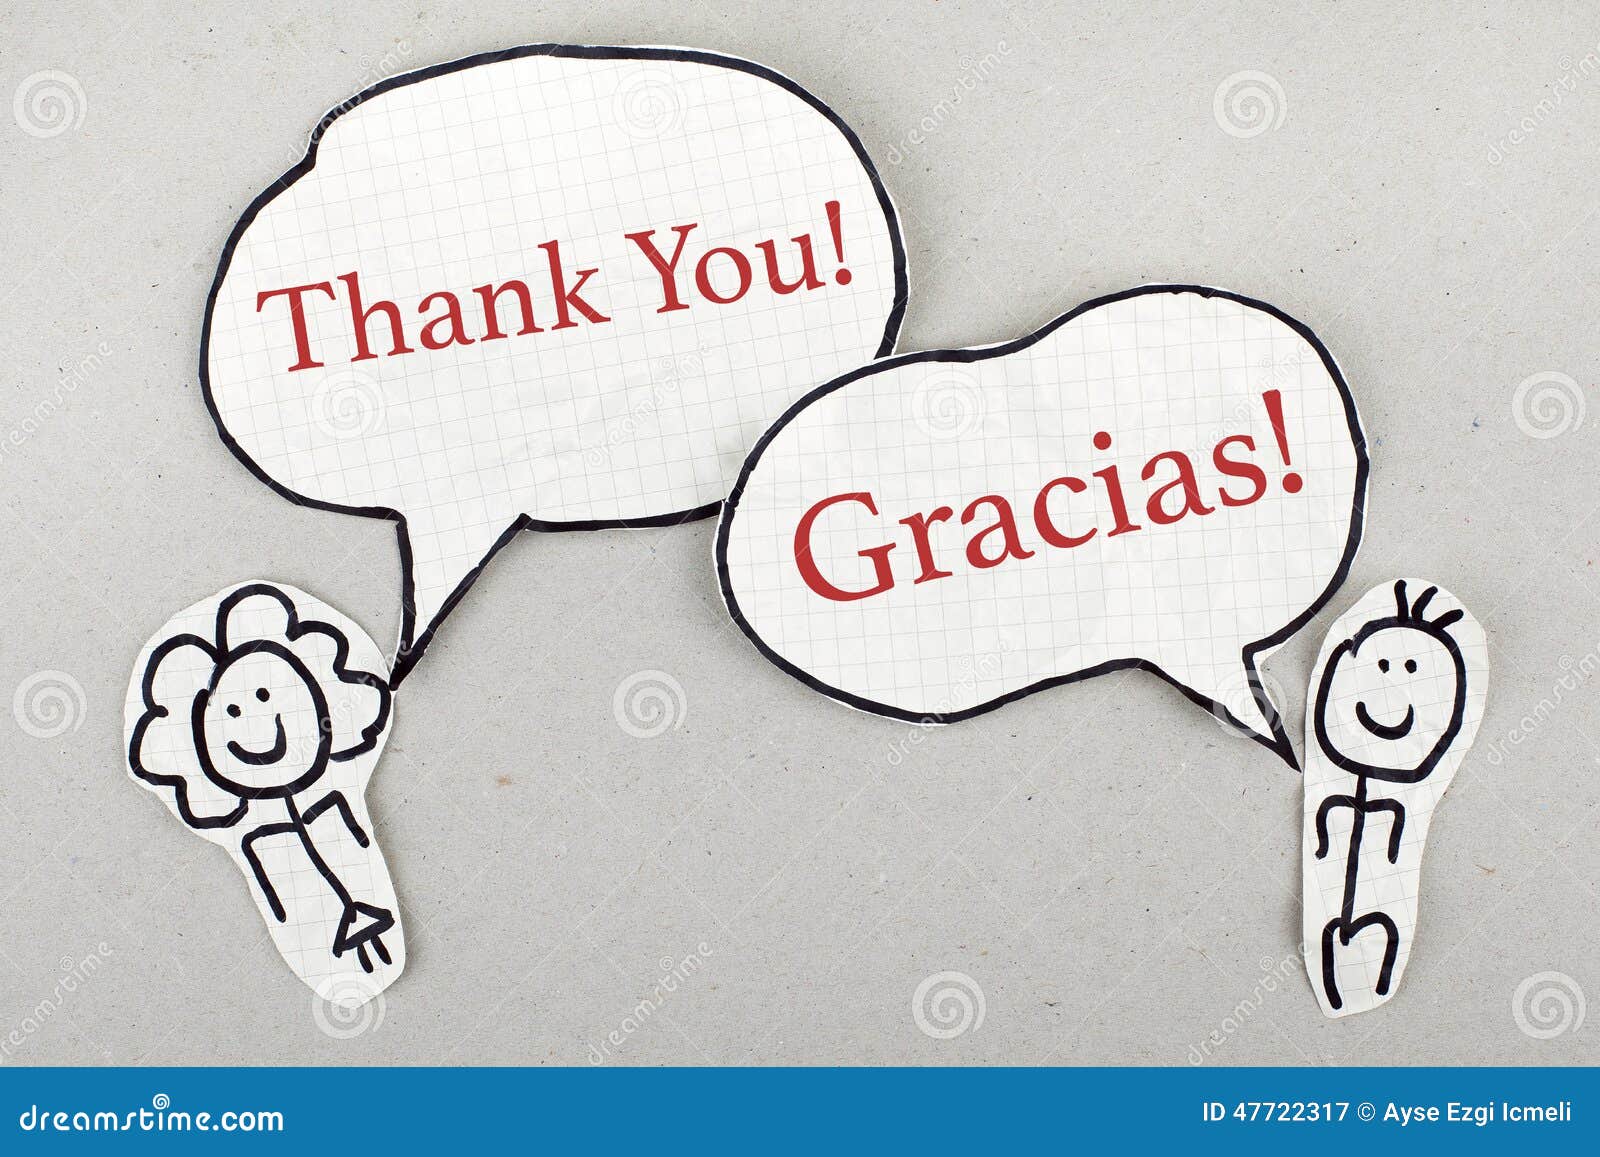 thank you clipart in different languages - photo #18